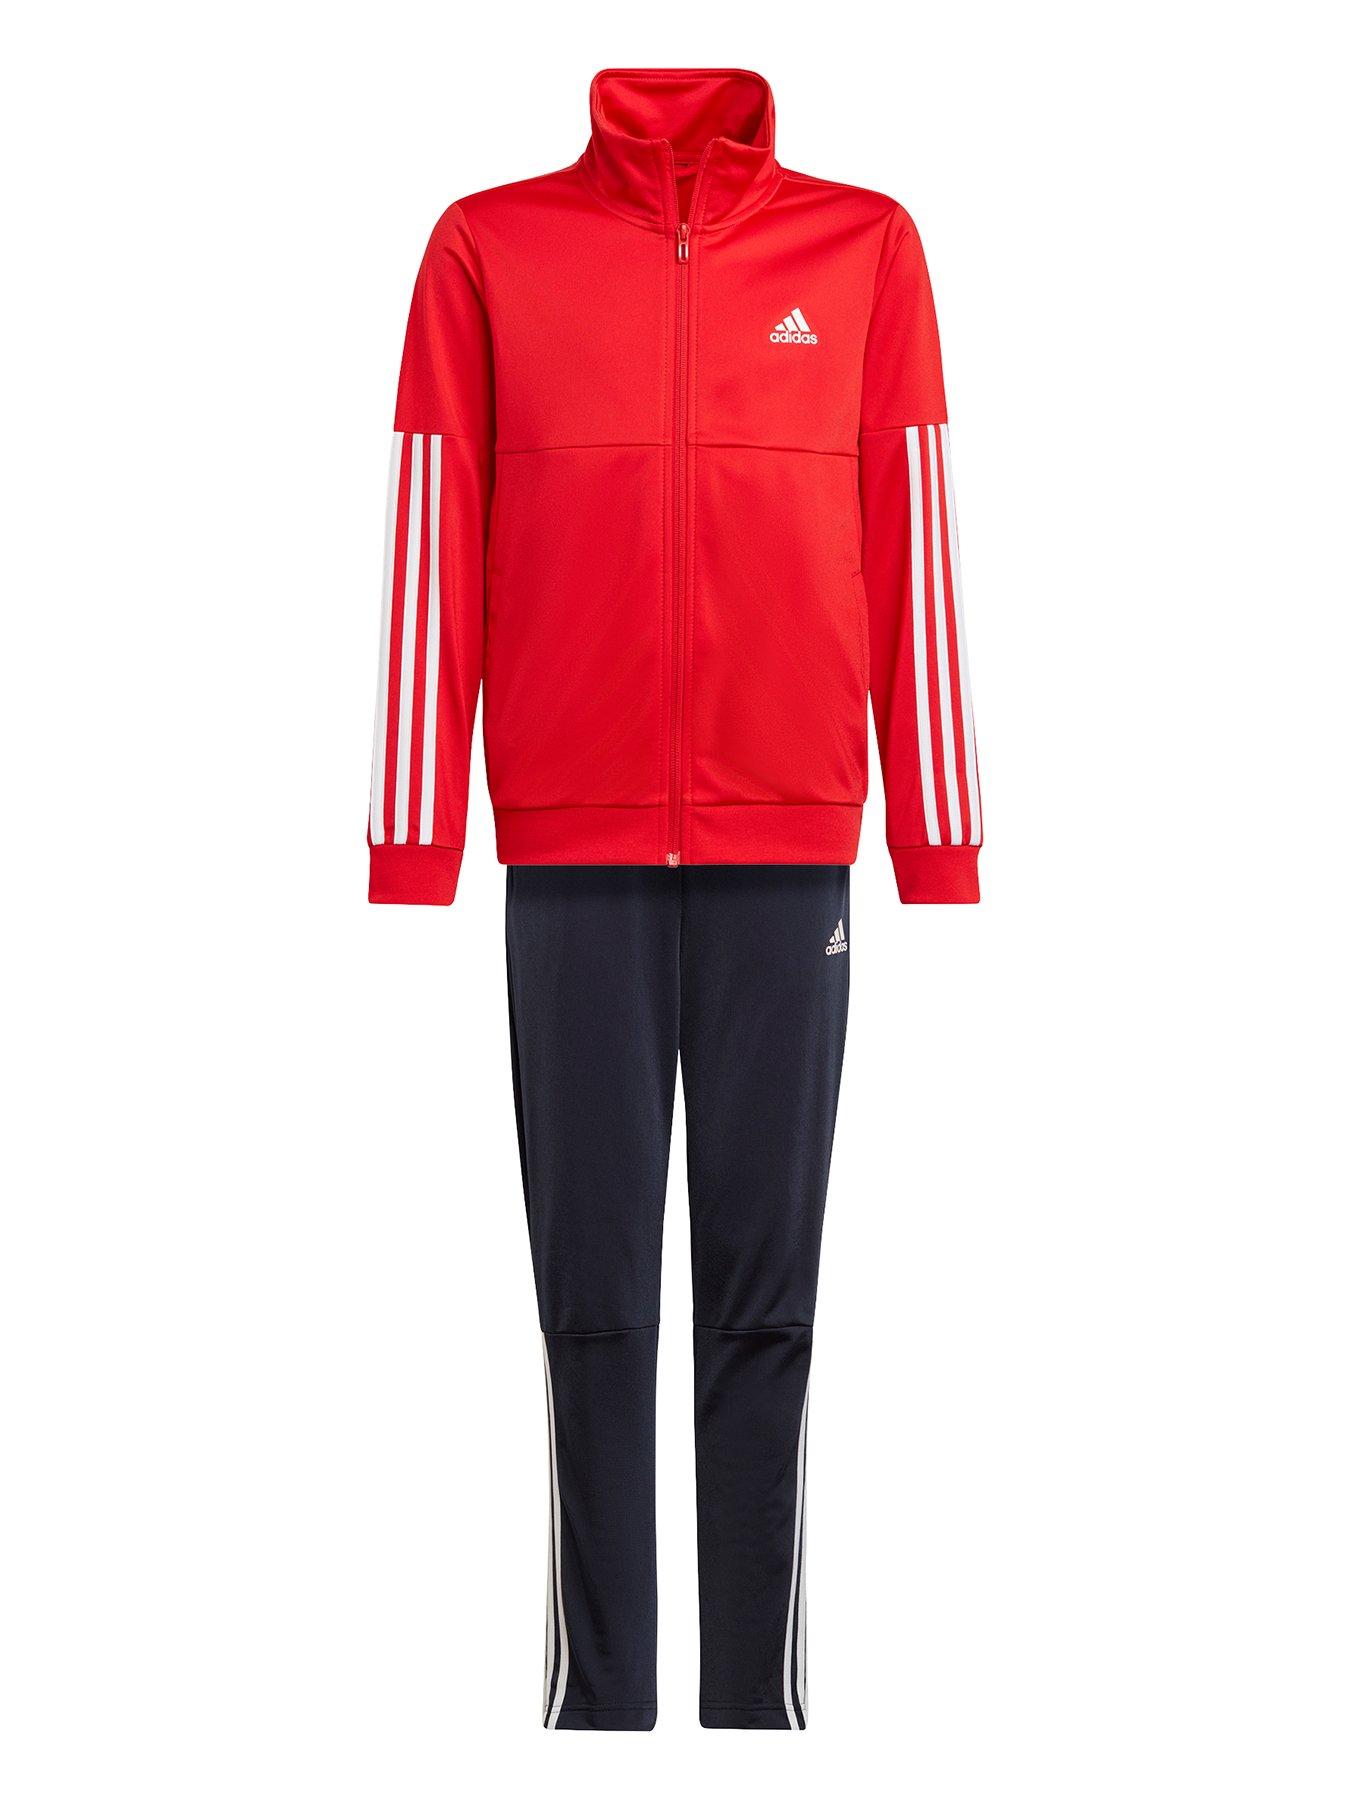 All Offers | Adidas | Tracksuits | Kids & sports clothing | Sports & leisure | Very Ireland